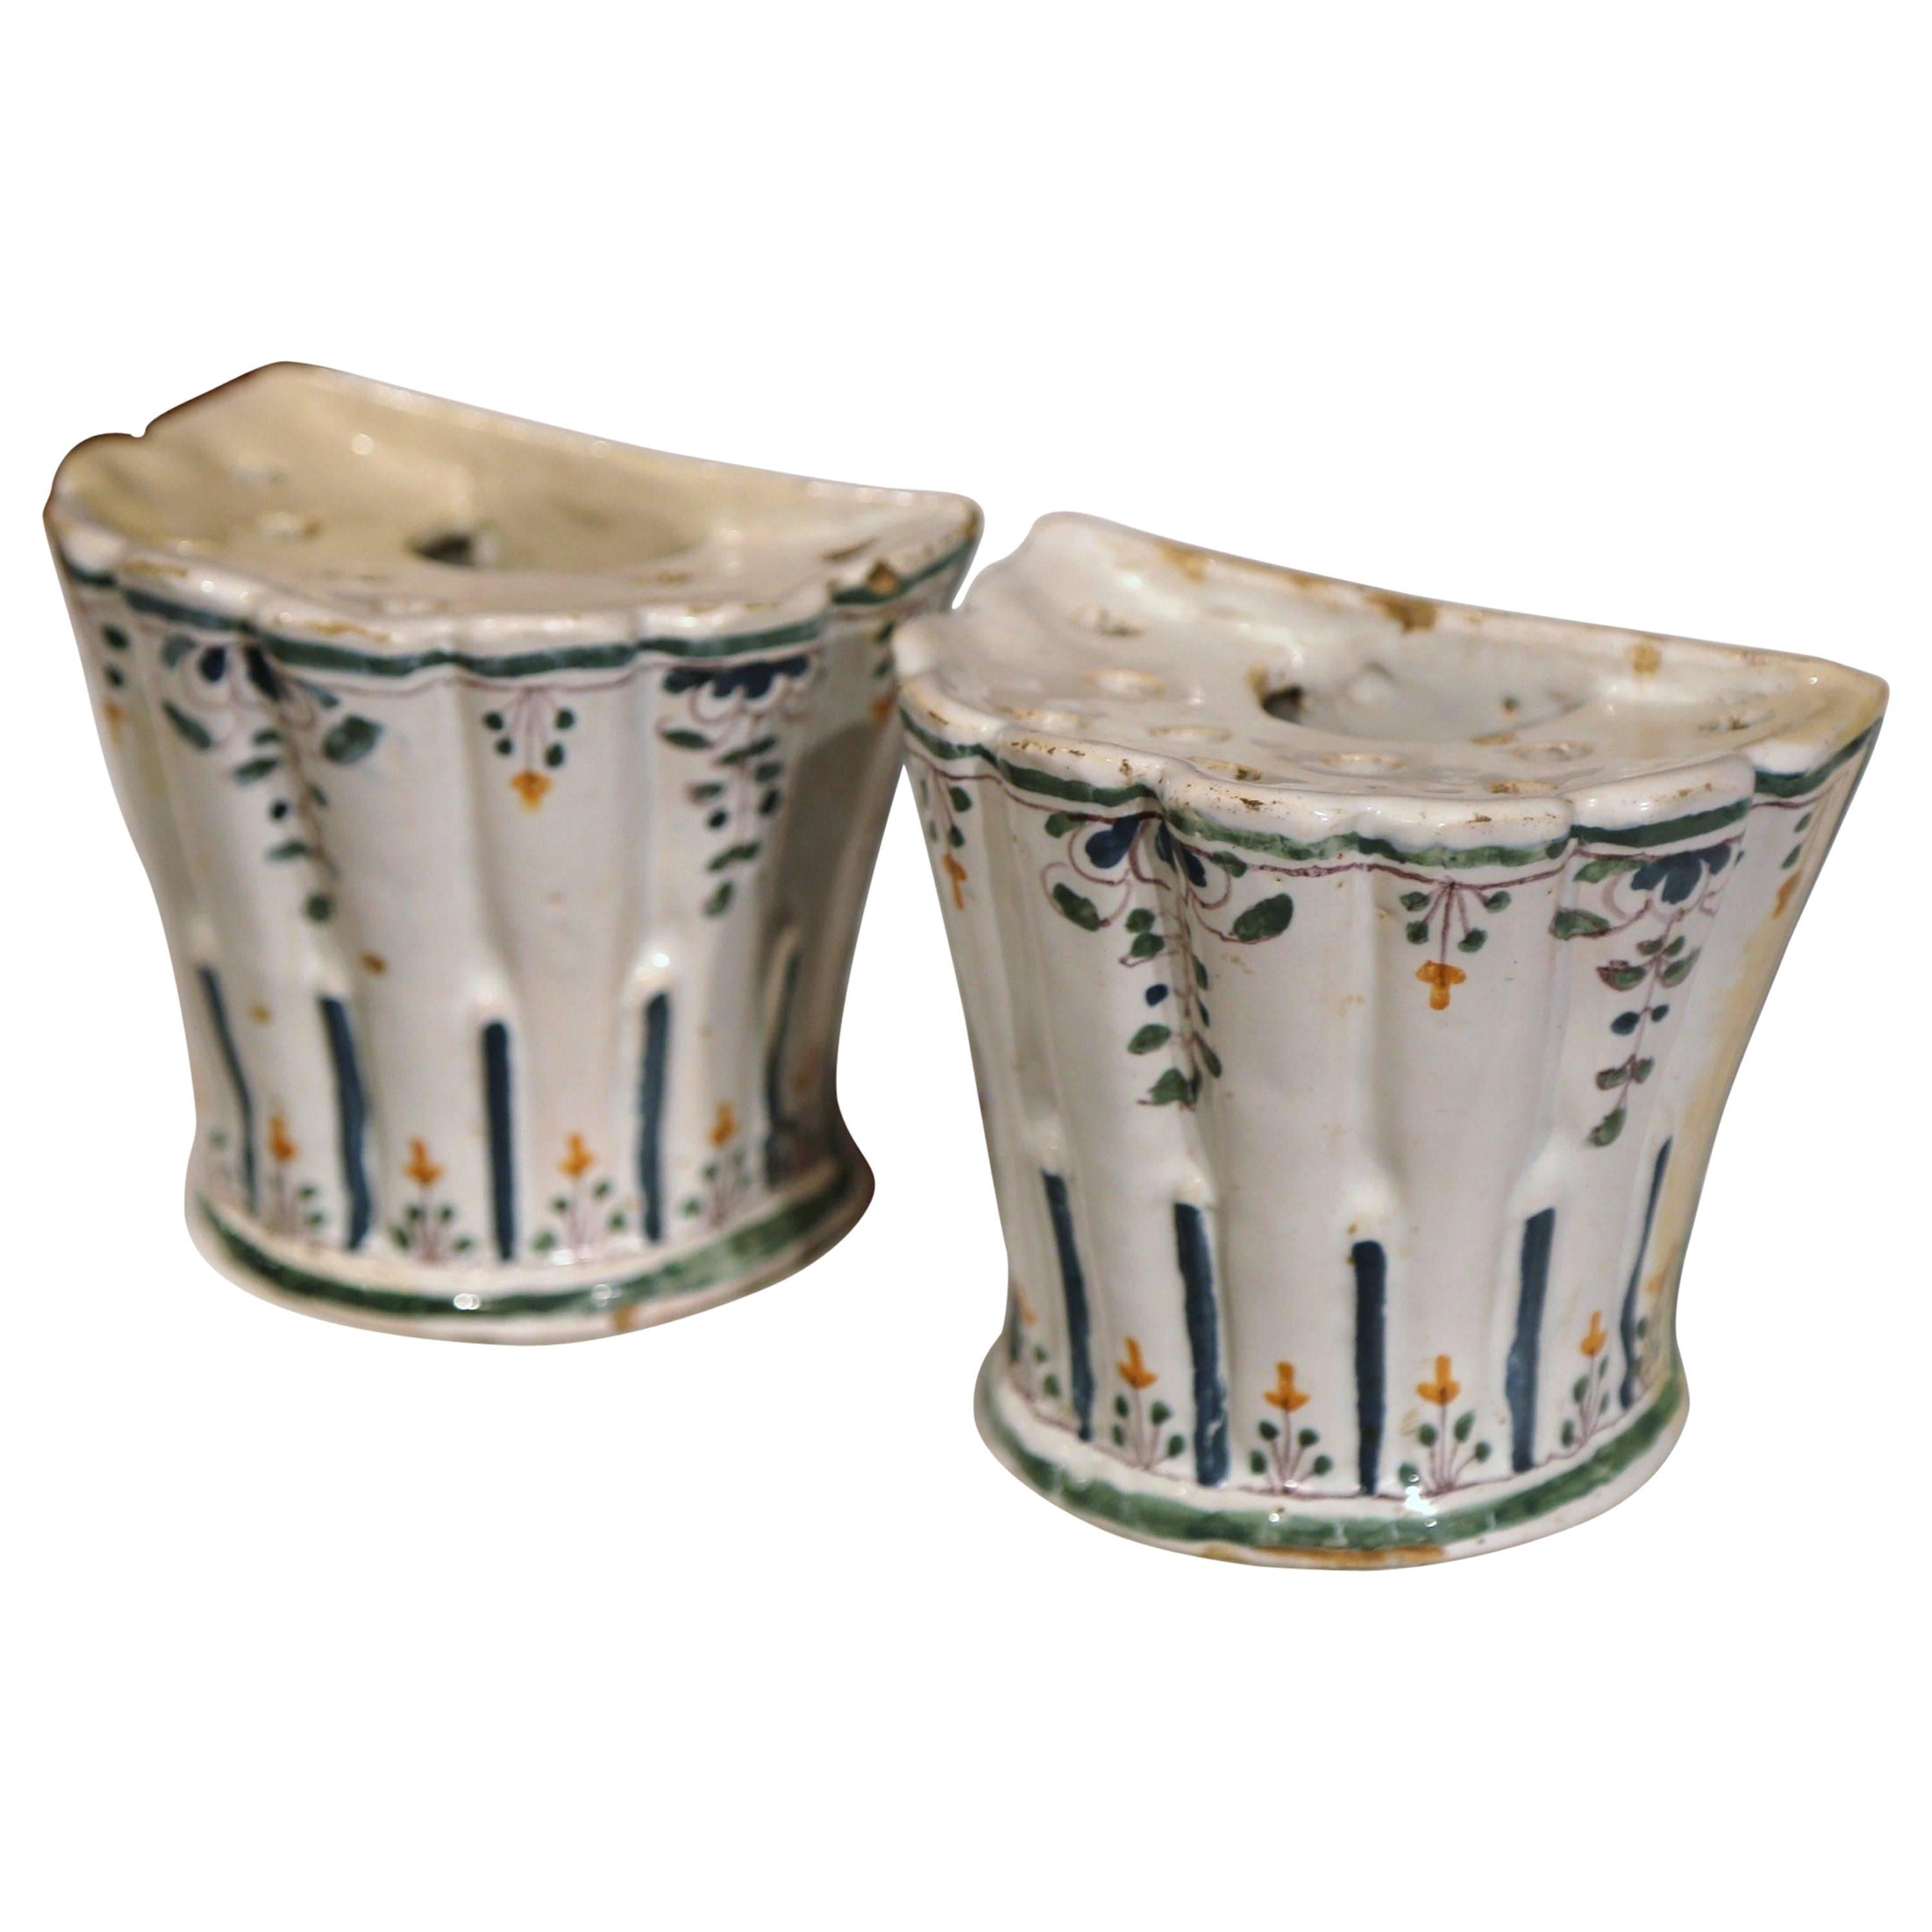 Pair of 19th Century French Hand-Painted Demilune Faience Bouquetières Vases